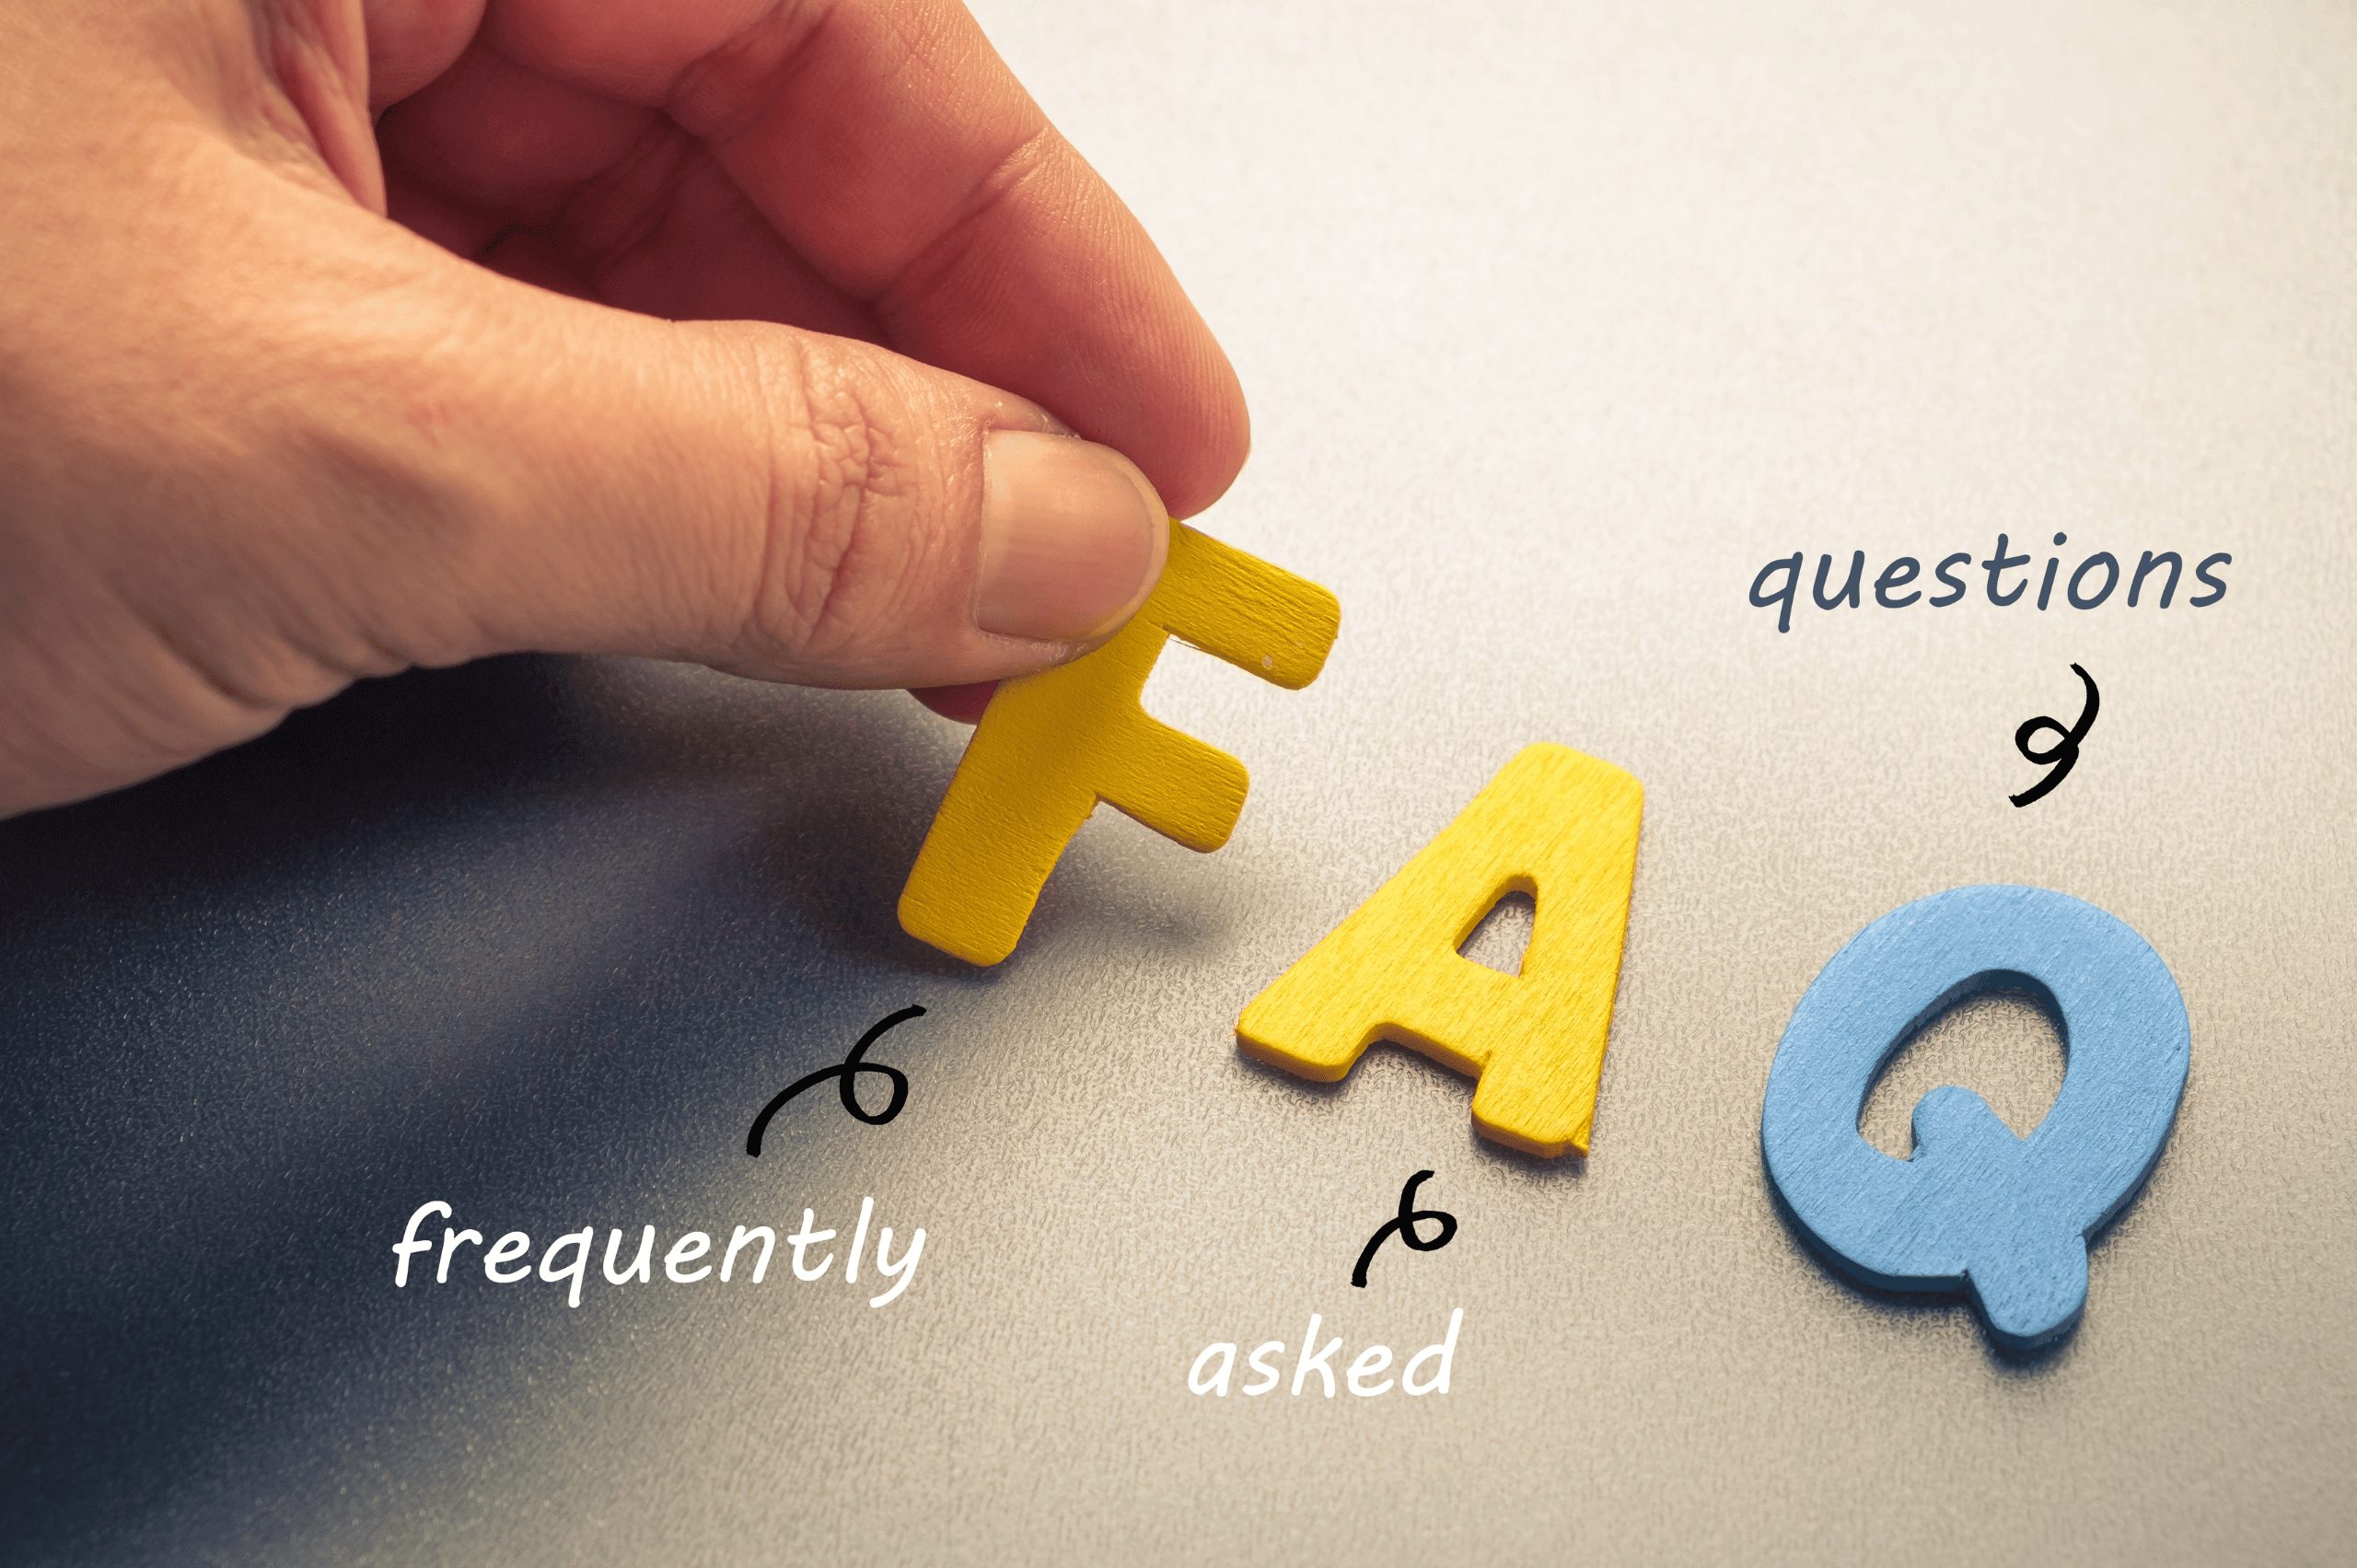 A hand showing that FAQ stands for Frequently Asked Questions